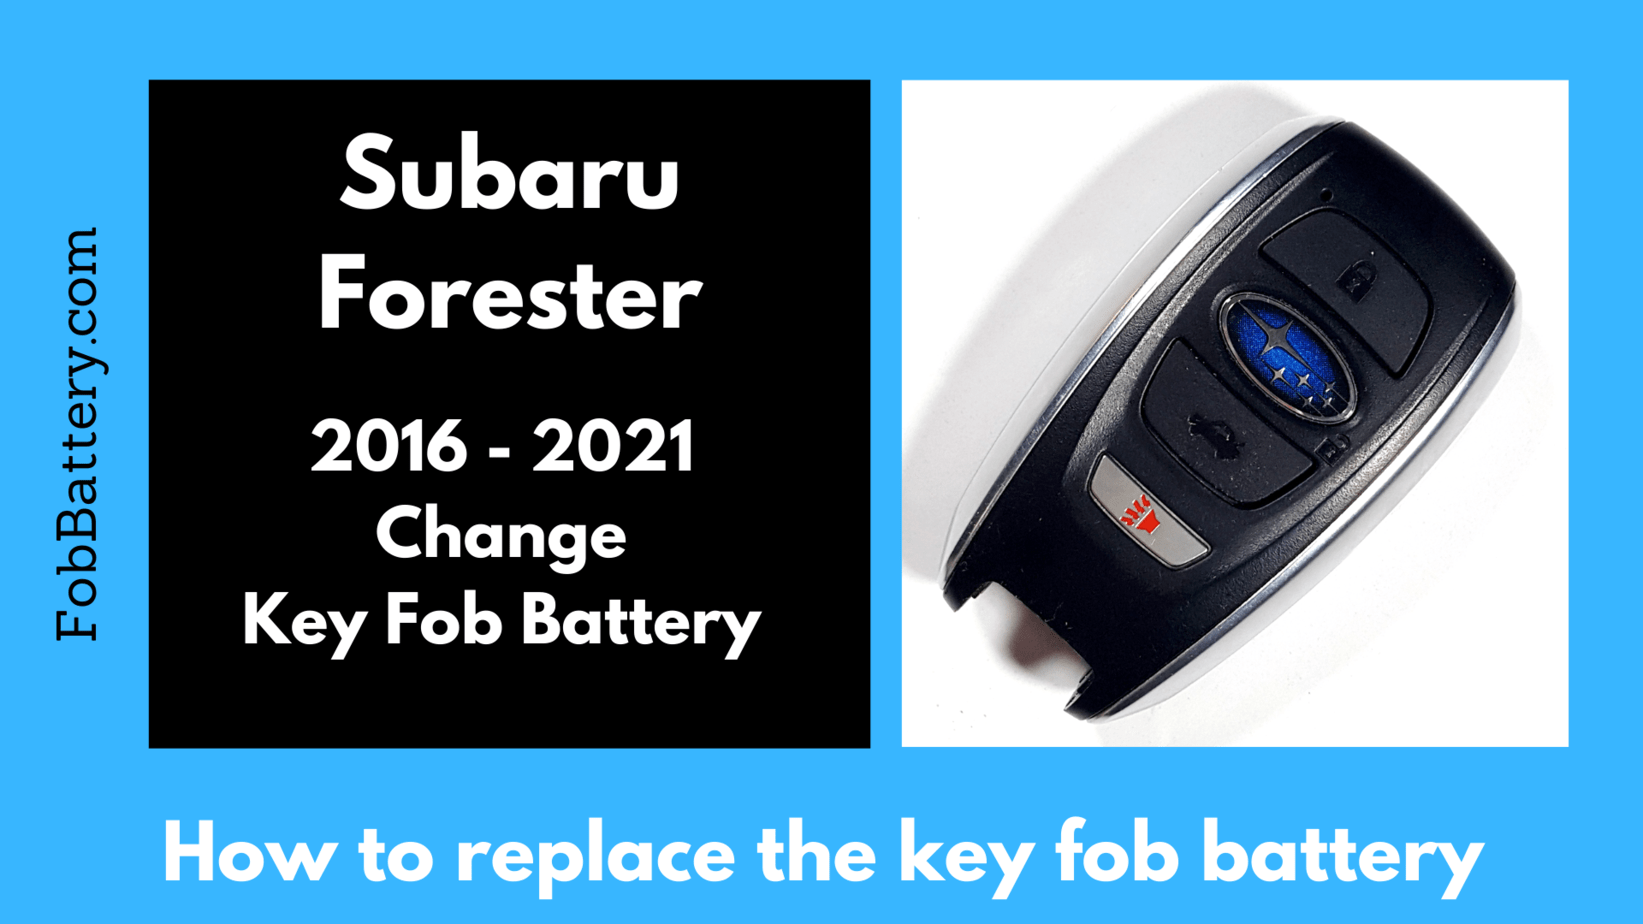 Subaru Forester key fob battery replacement